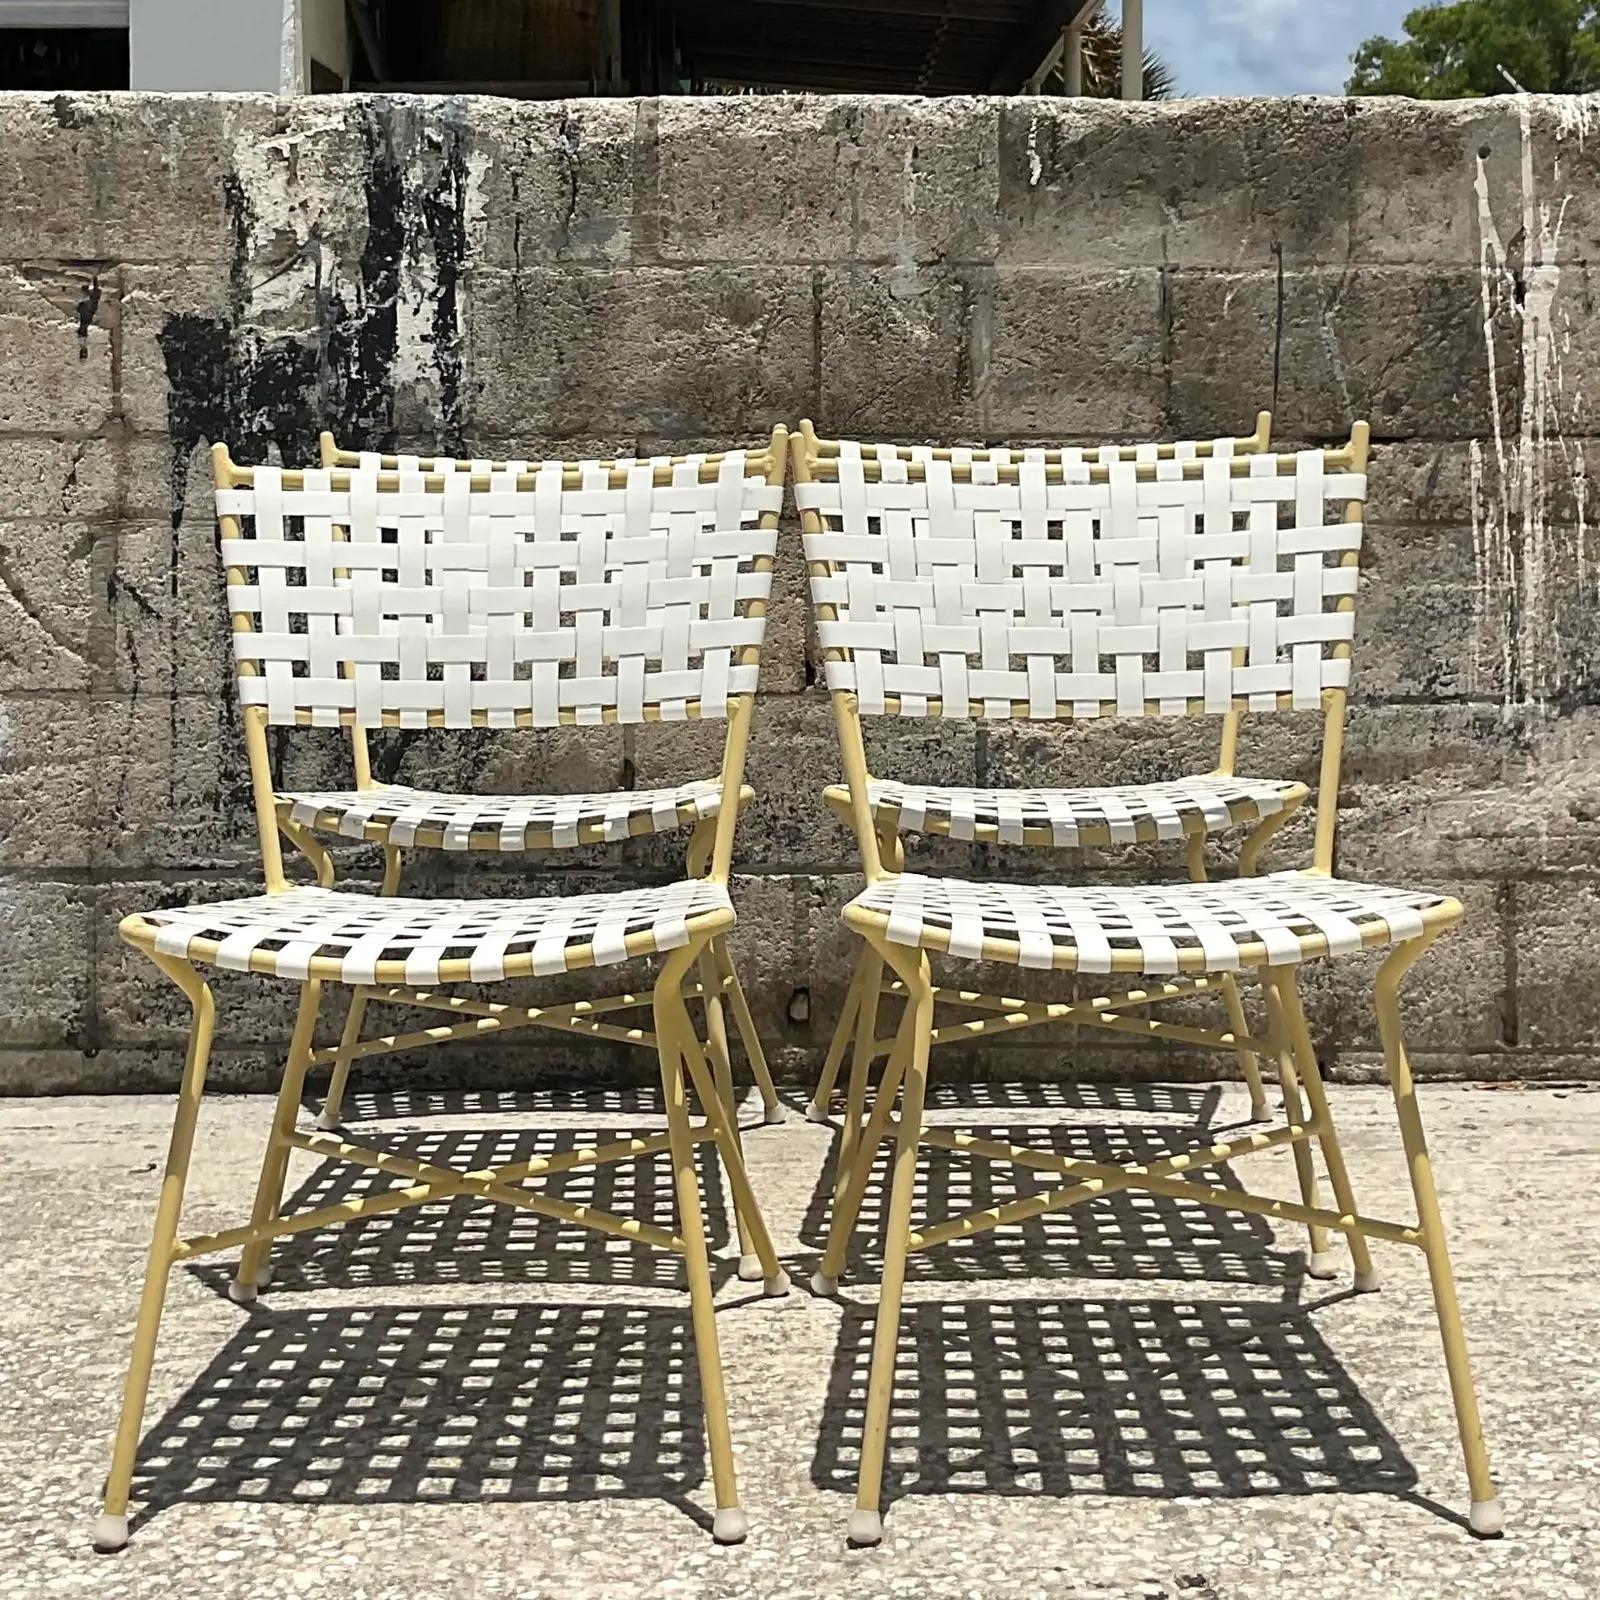 Fantastic set of vintage MCM outdoor dining table and chairs. Chic clean shape with vinyl strapping. Coordinating lounge chairs and tables also available. Acquired from a Miami estate.